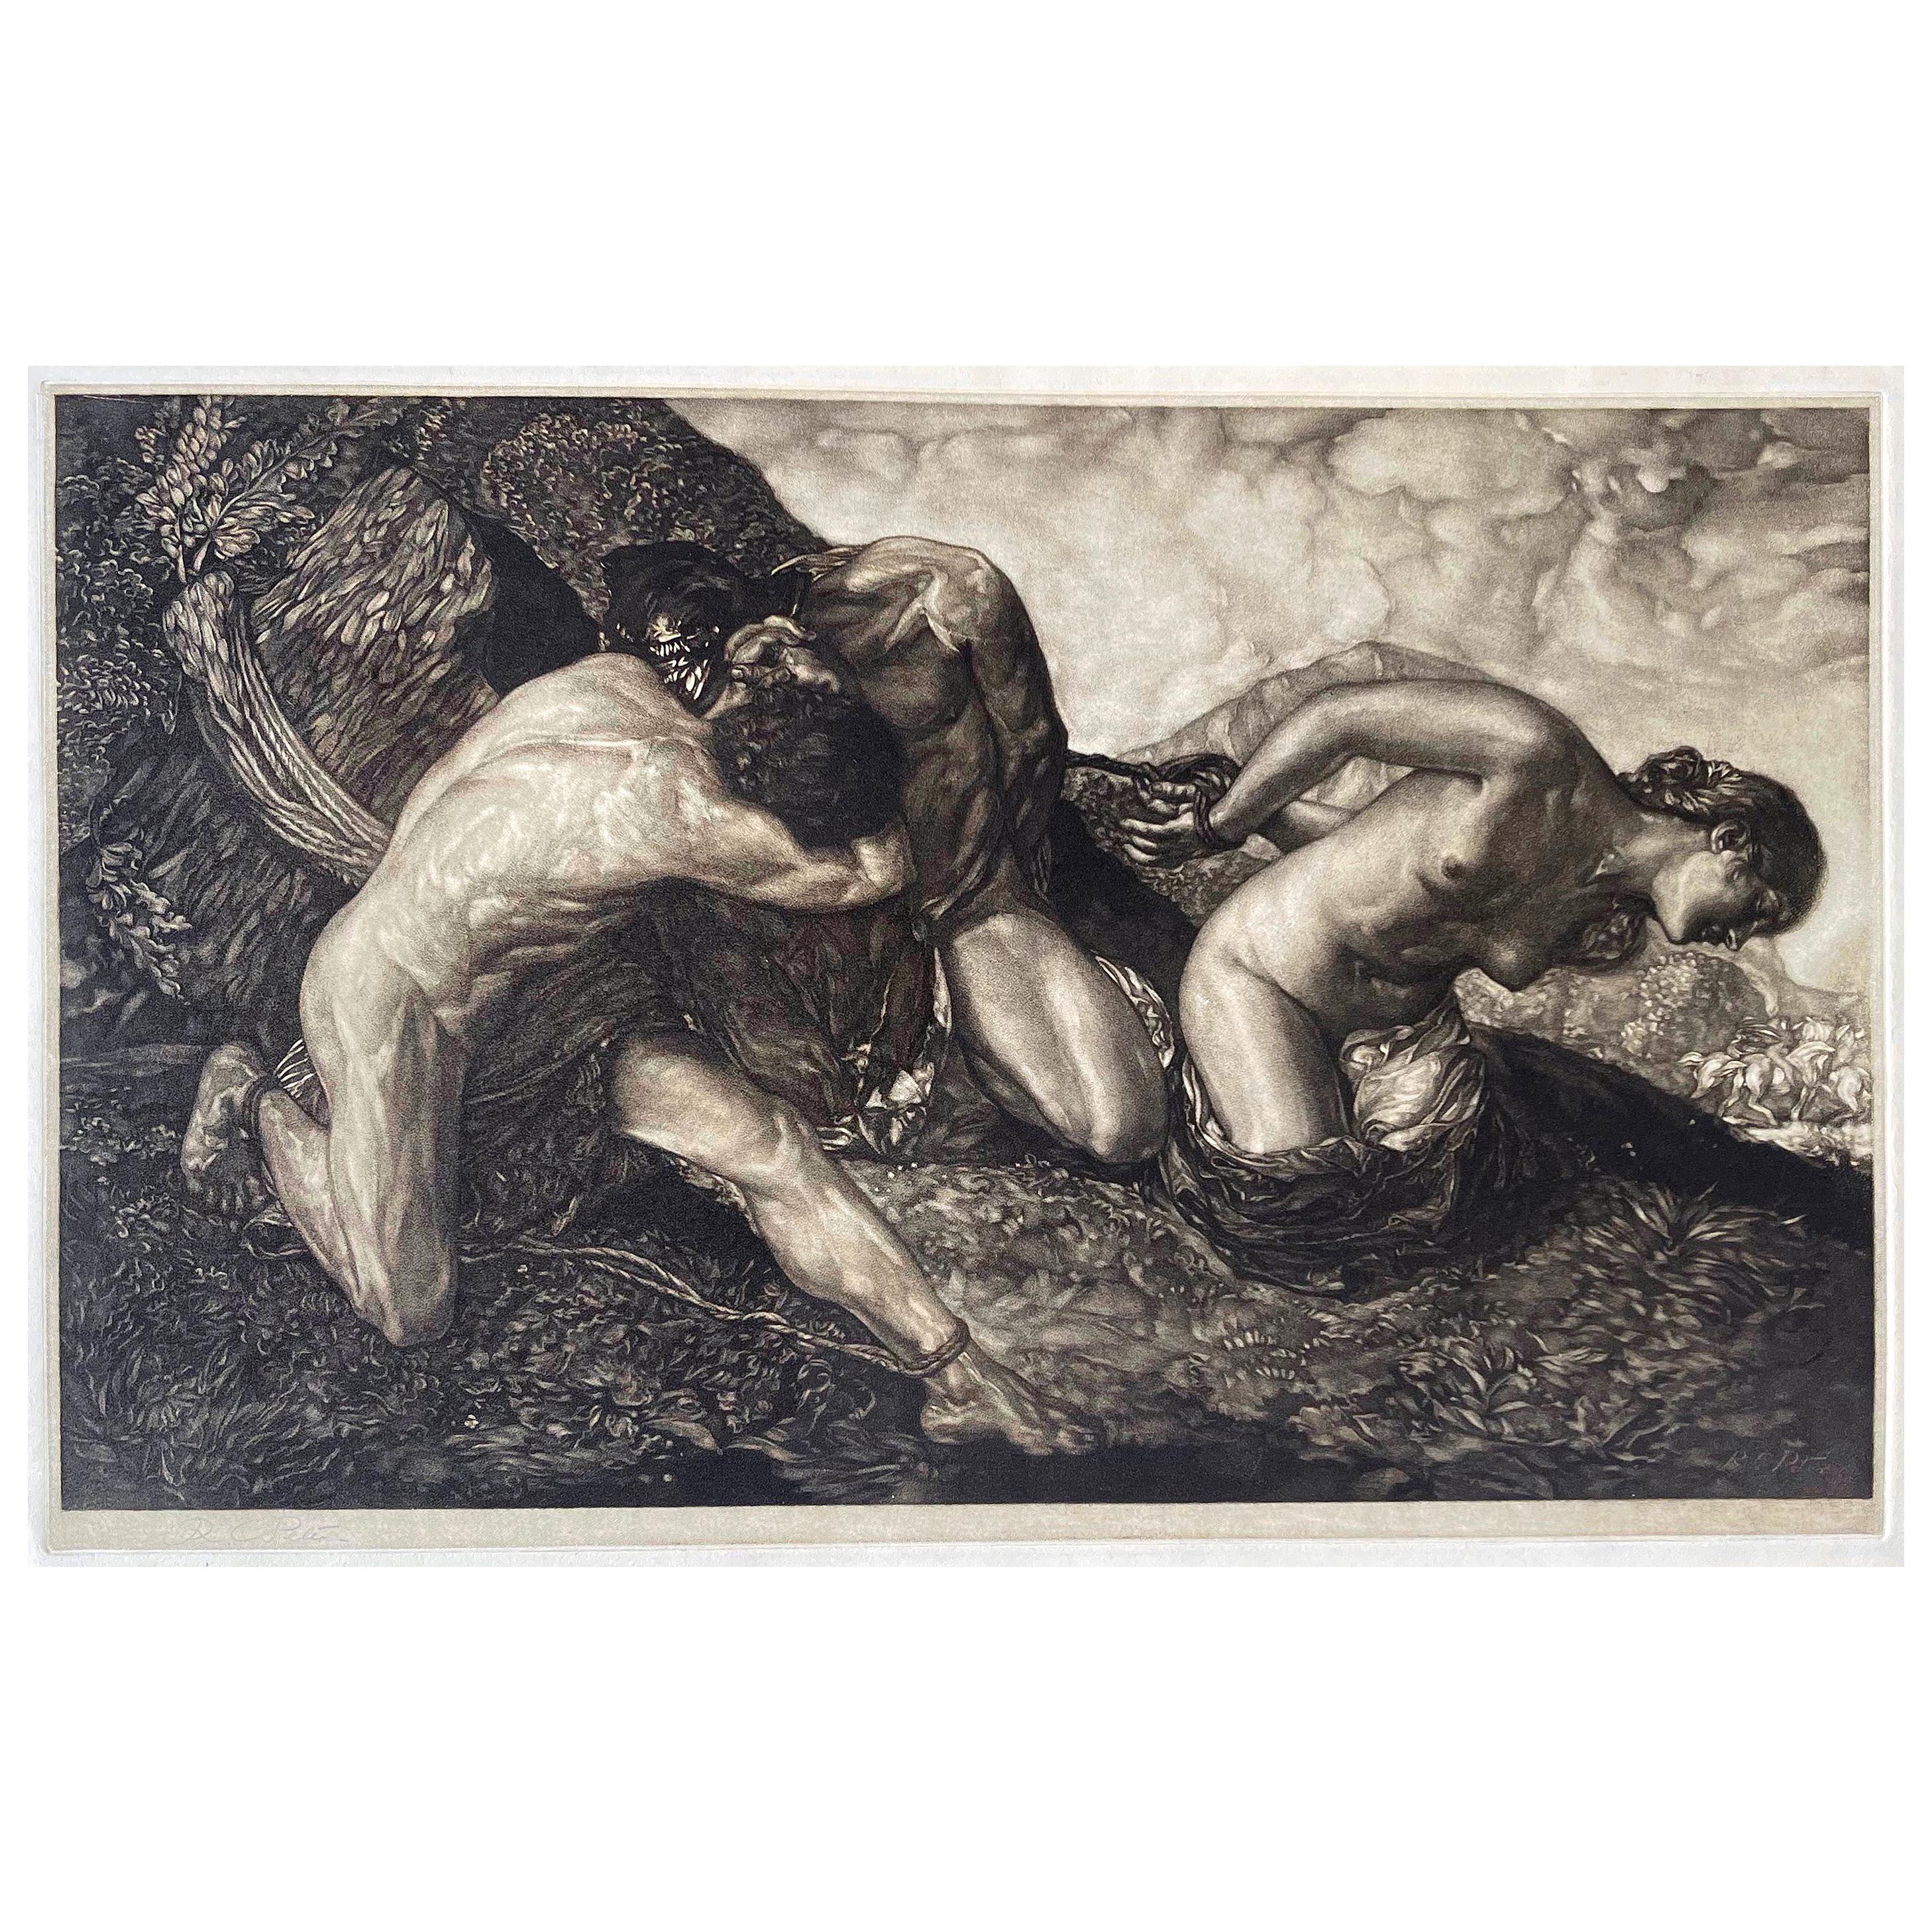 "Allegory of Life, " Art Deco Mezzotint with Nude Figures by Peter